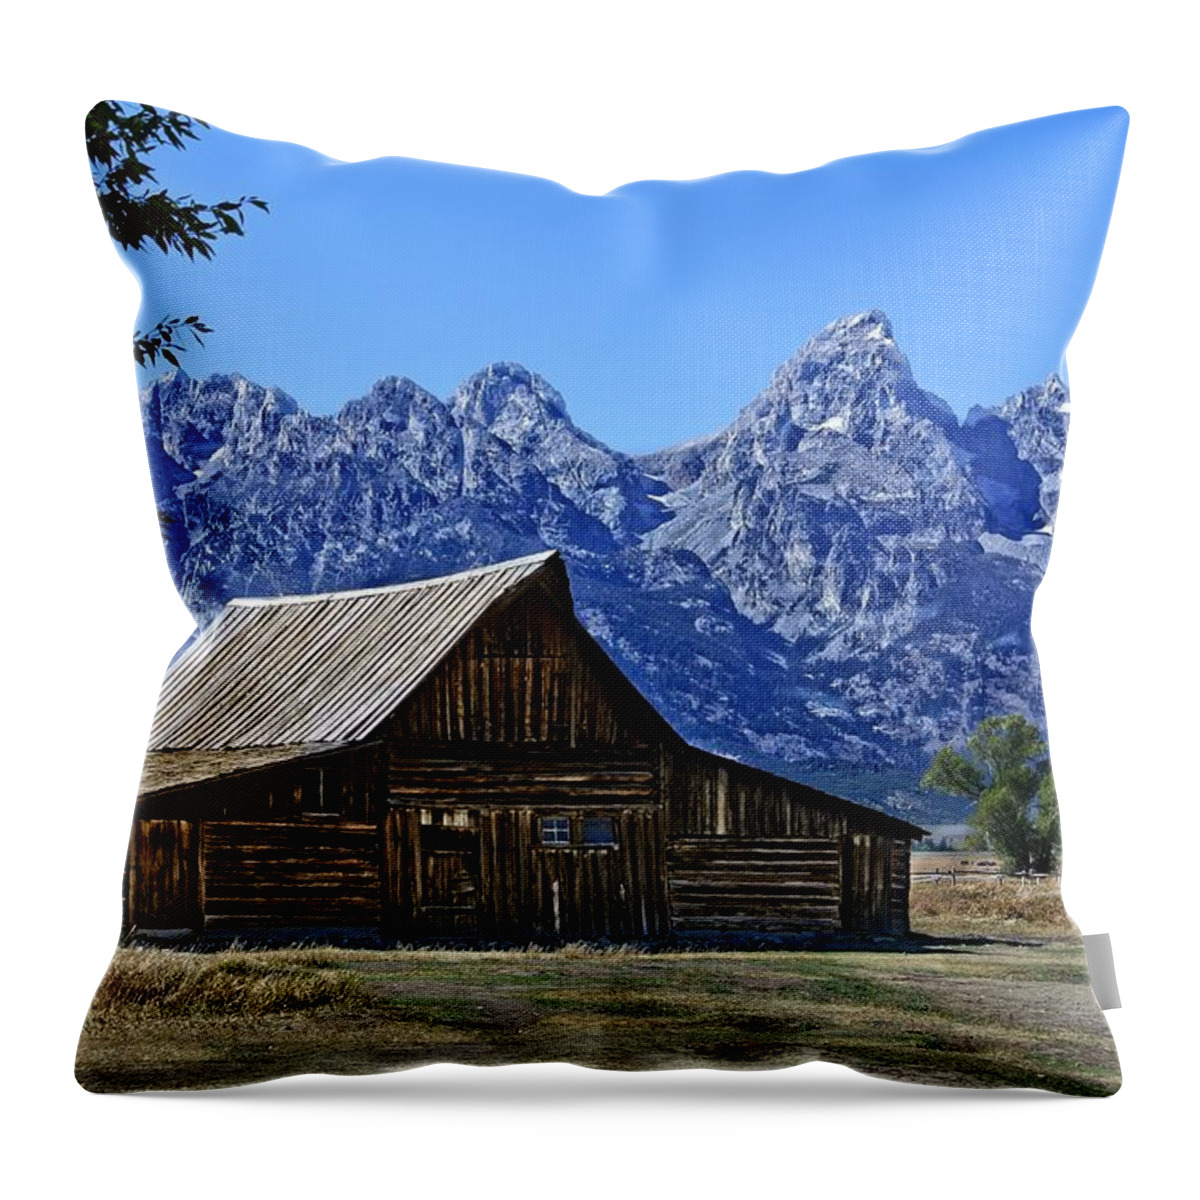 Tetons Throw Pillow featuring the photograph The Tetons And The Barn by Image Takers Photography LLC - Laura Morgan